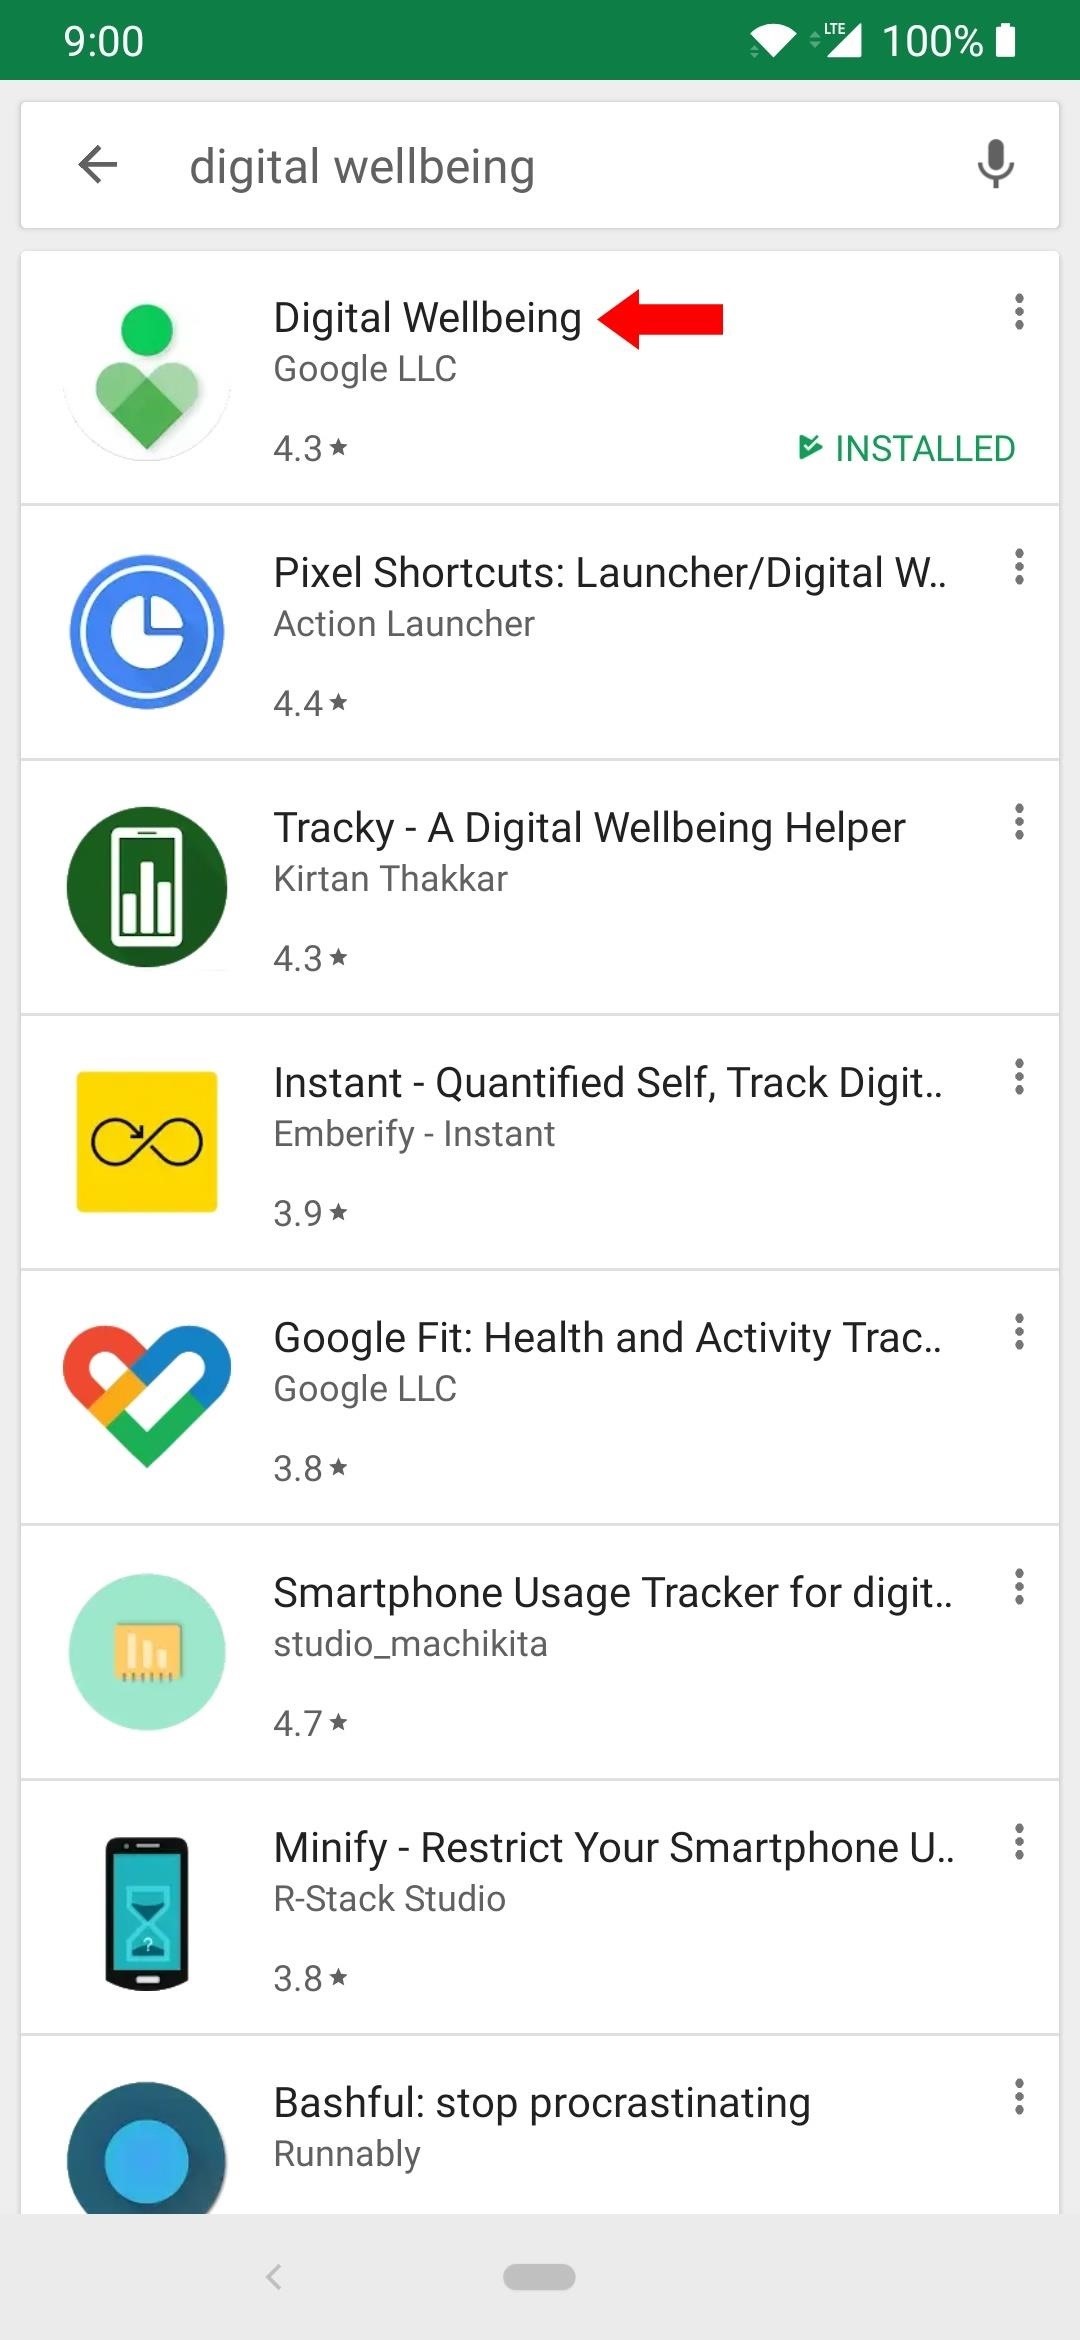 How to Get Google's Digital Wellbeing Feature on Any Android Device